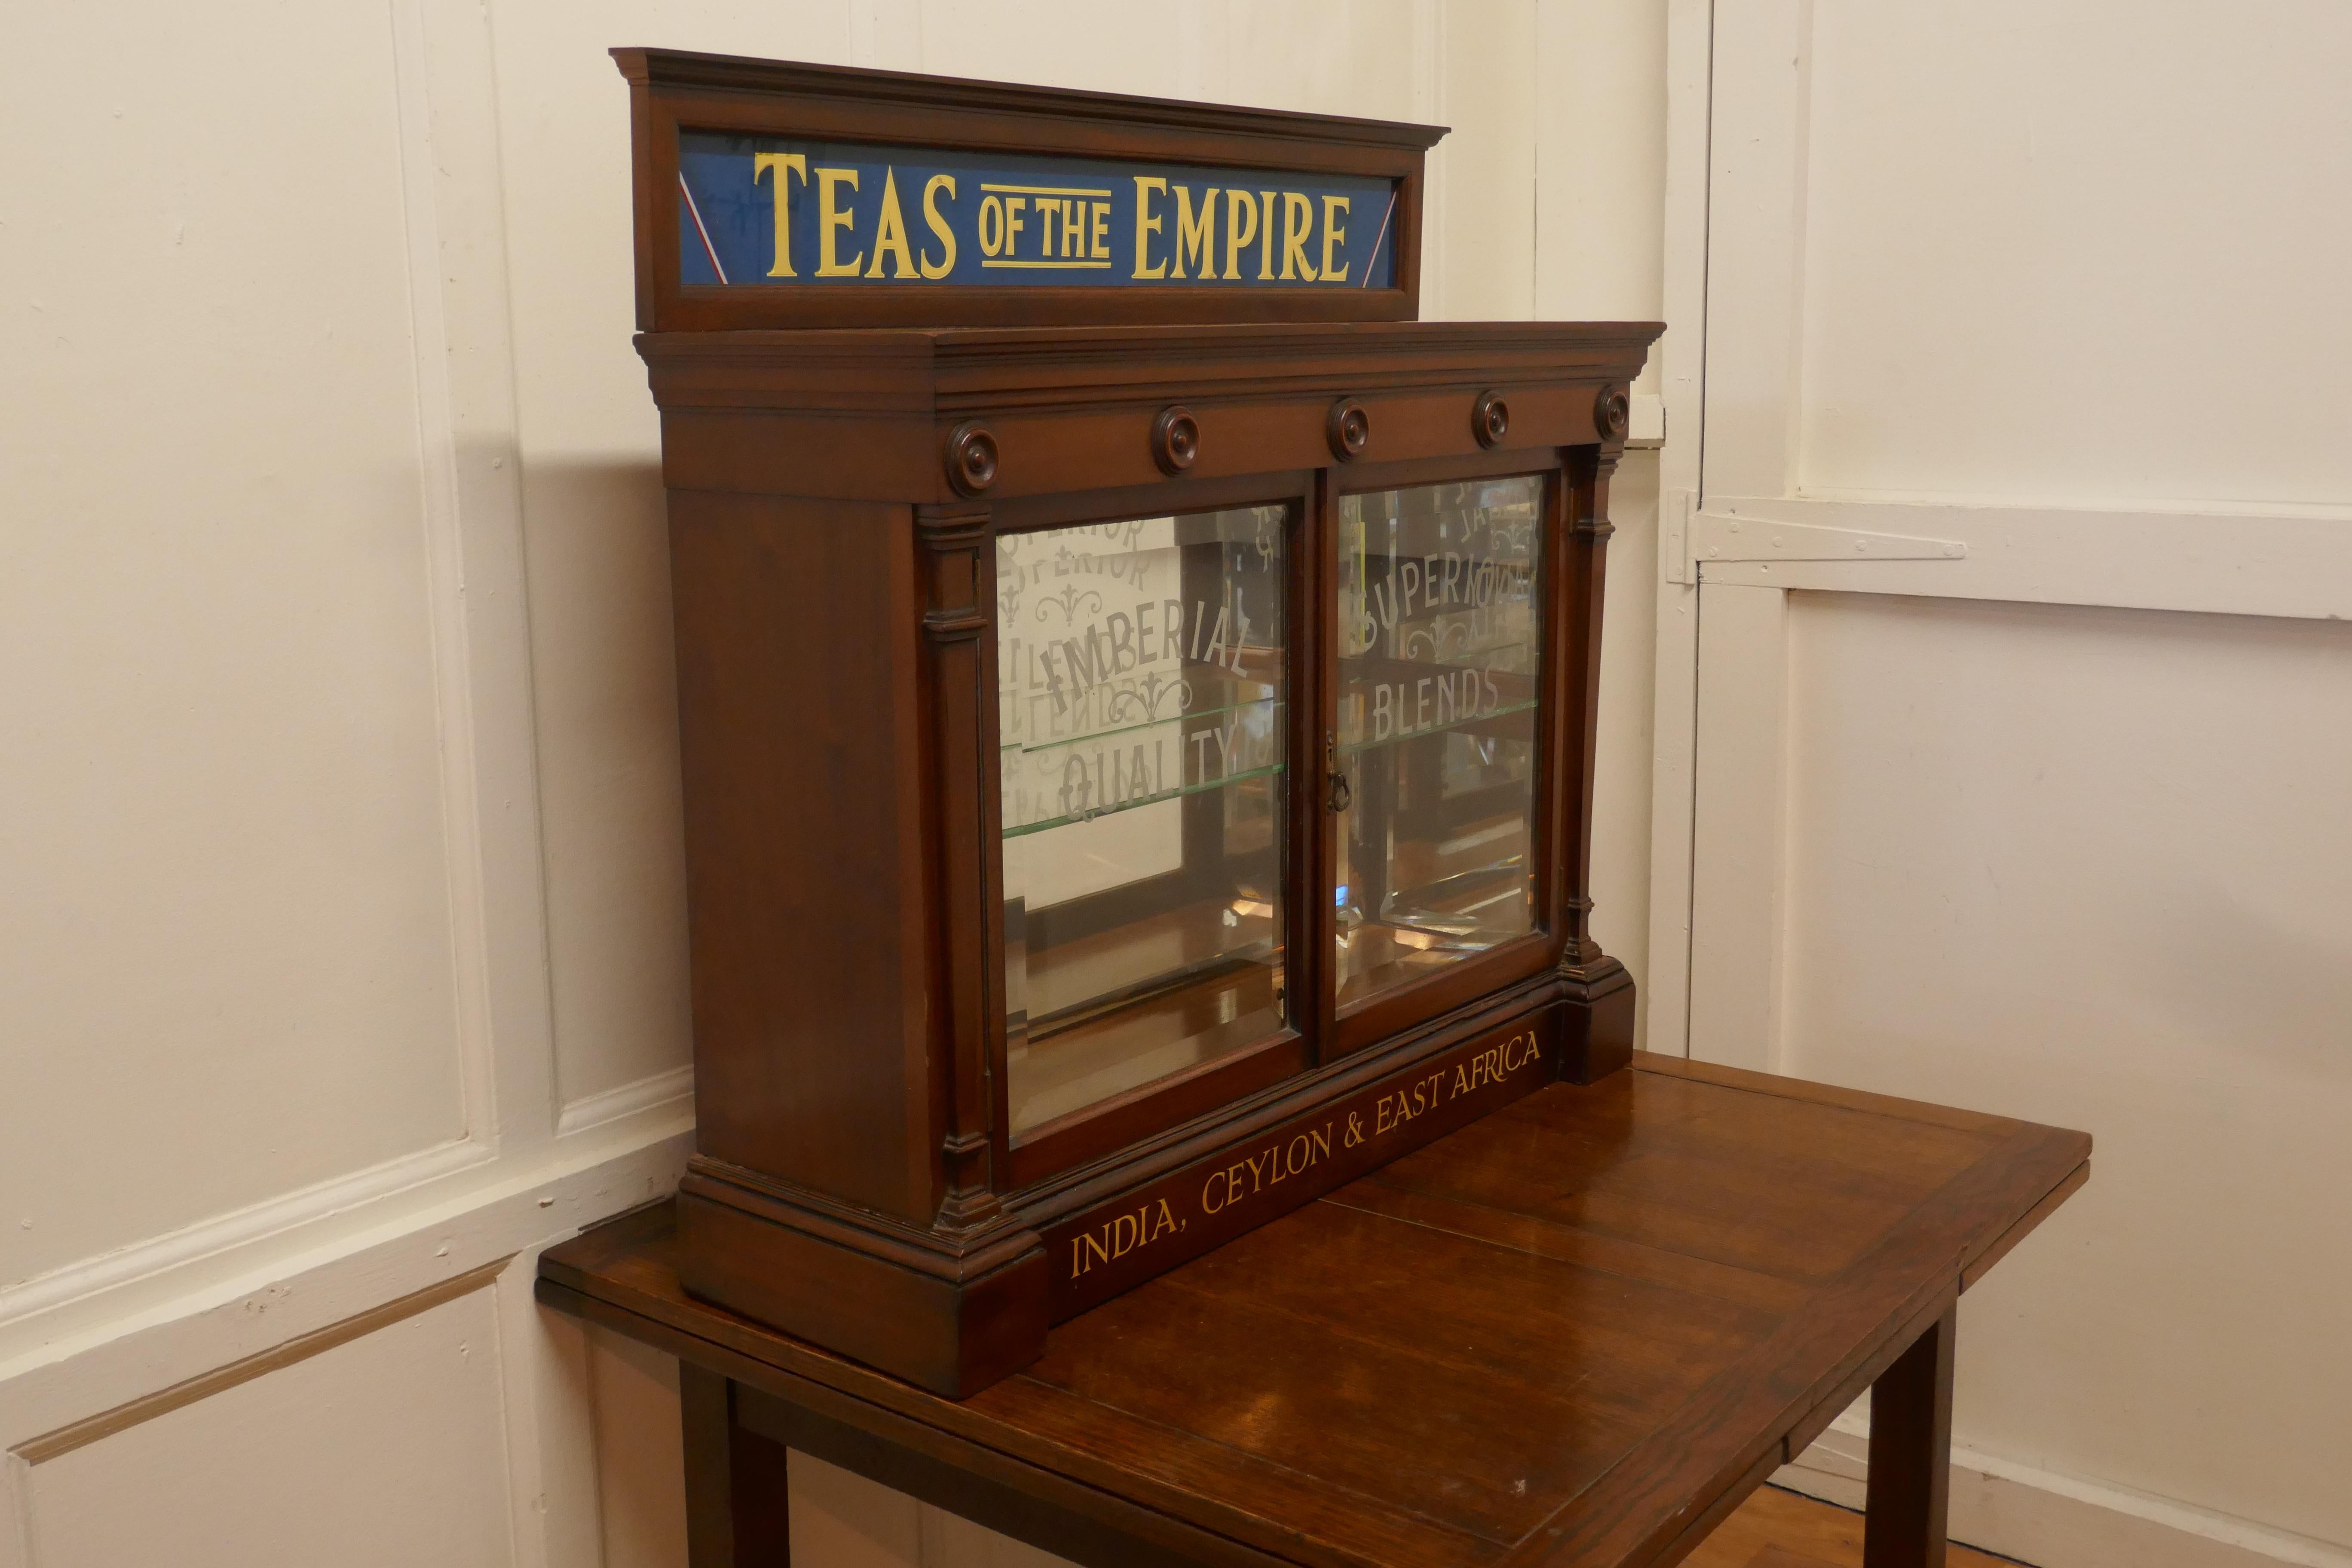  Victorian Empire Tea Cabinet, Tea Room, Cafe Display  A magnificent piece  In Good Condition For Sale In Chillerton, Isle of Wight